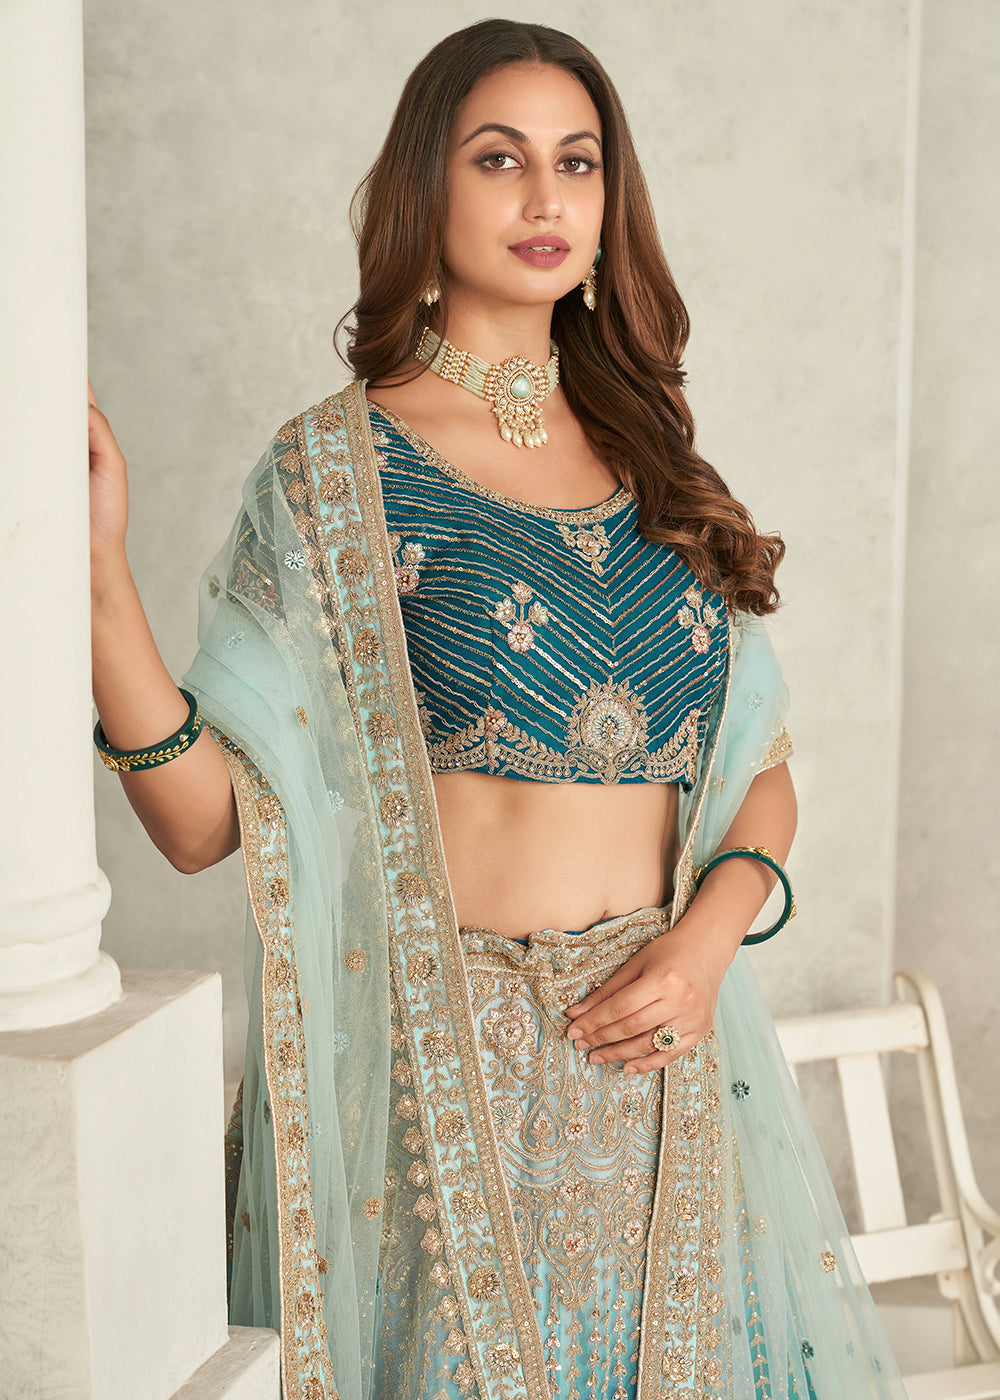 Buy Now Blue Wedding Style Embroidered A Line Lehenga Choli Online in USA, UK, Canada & Worldwide at Empress Clothing. 